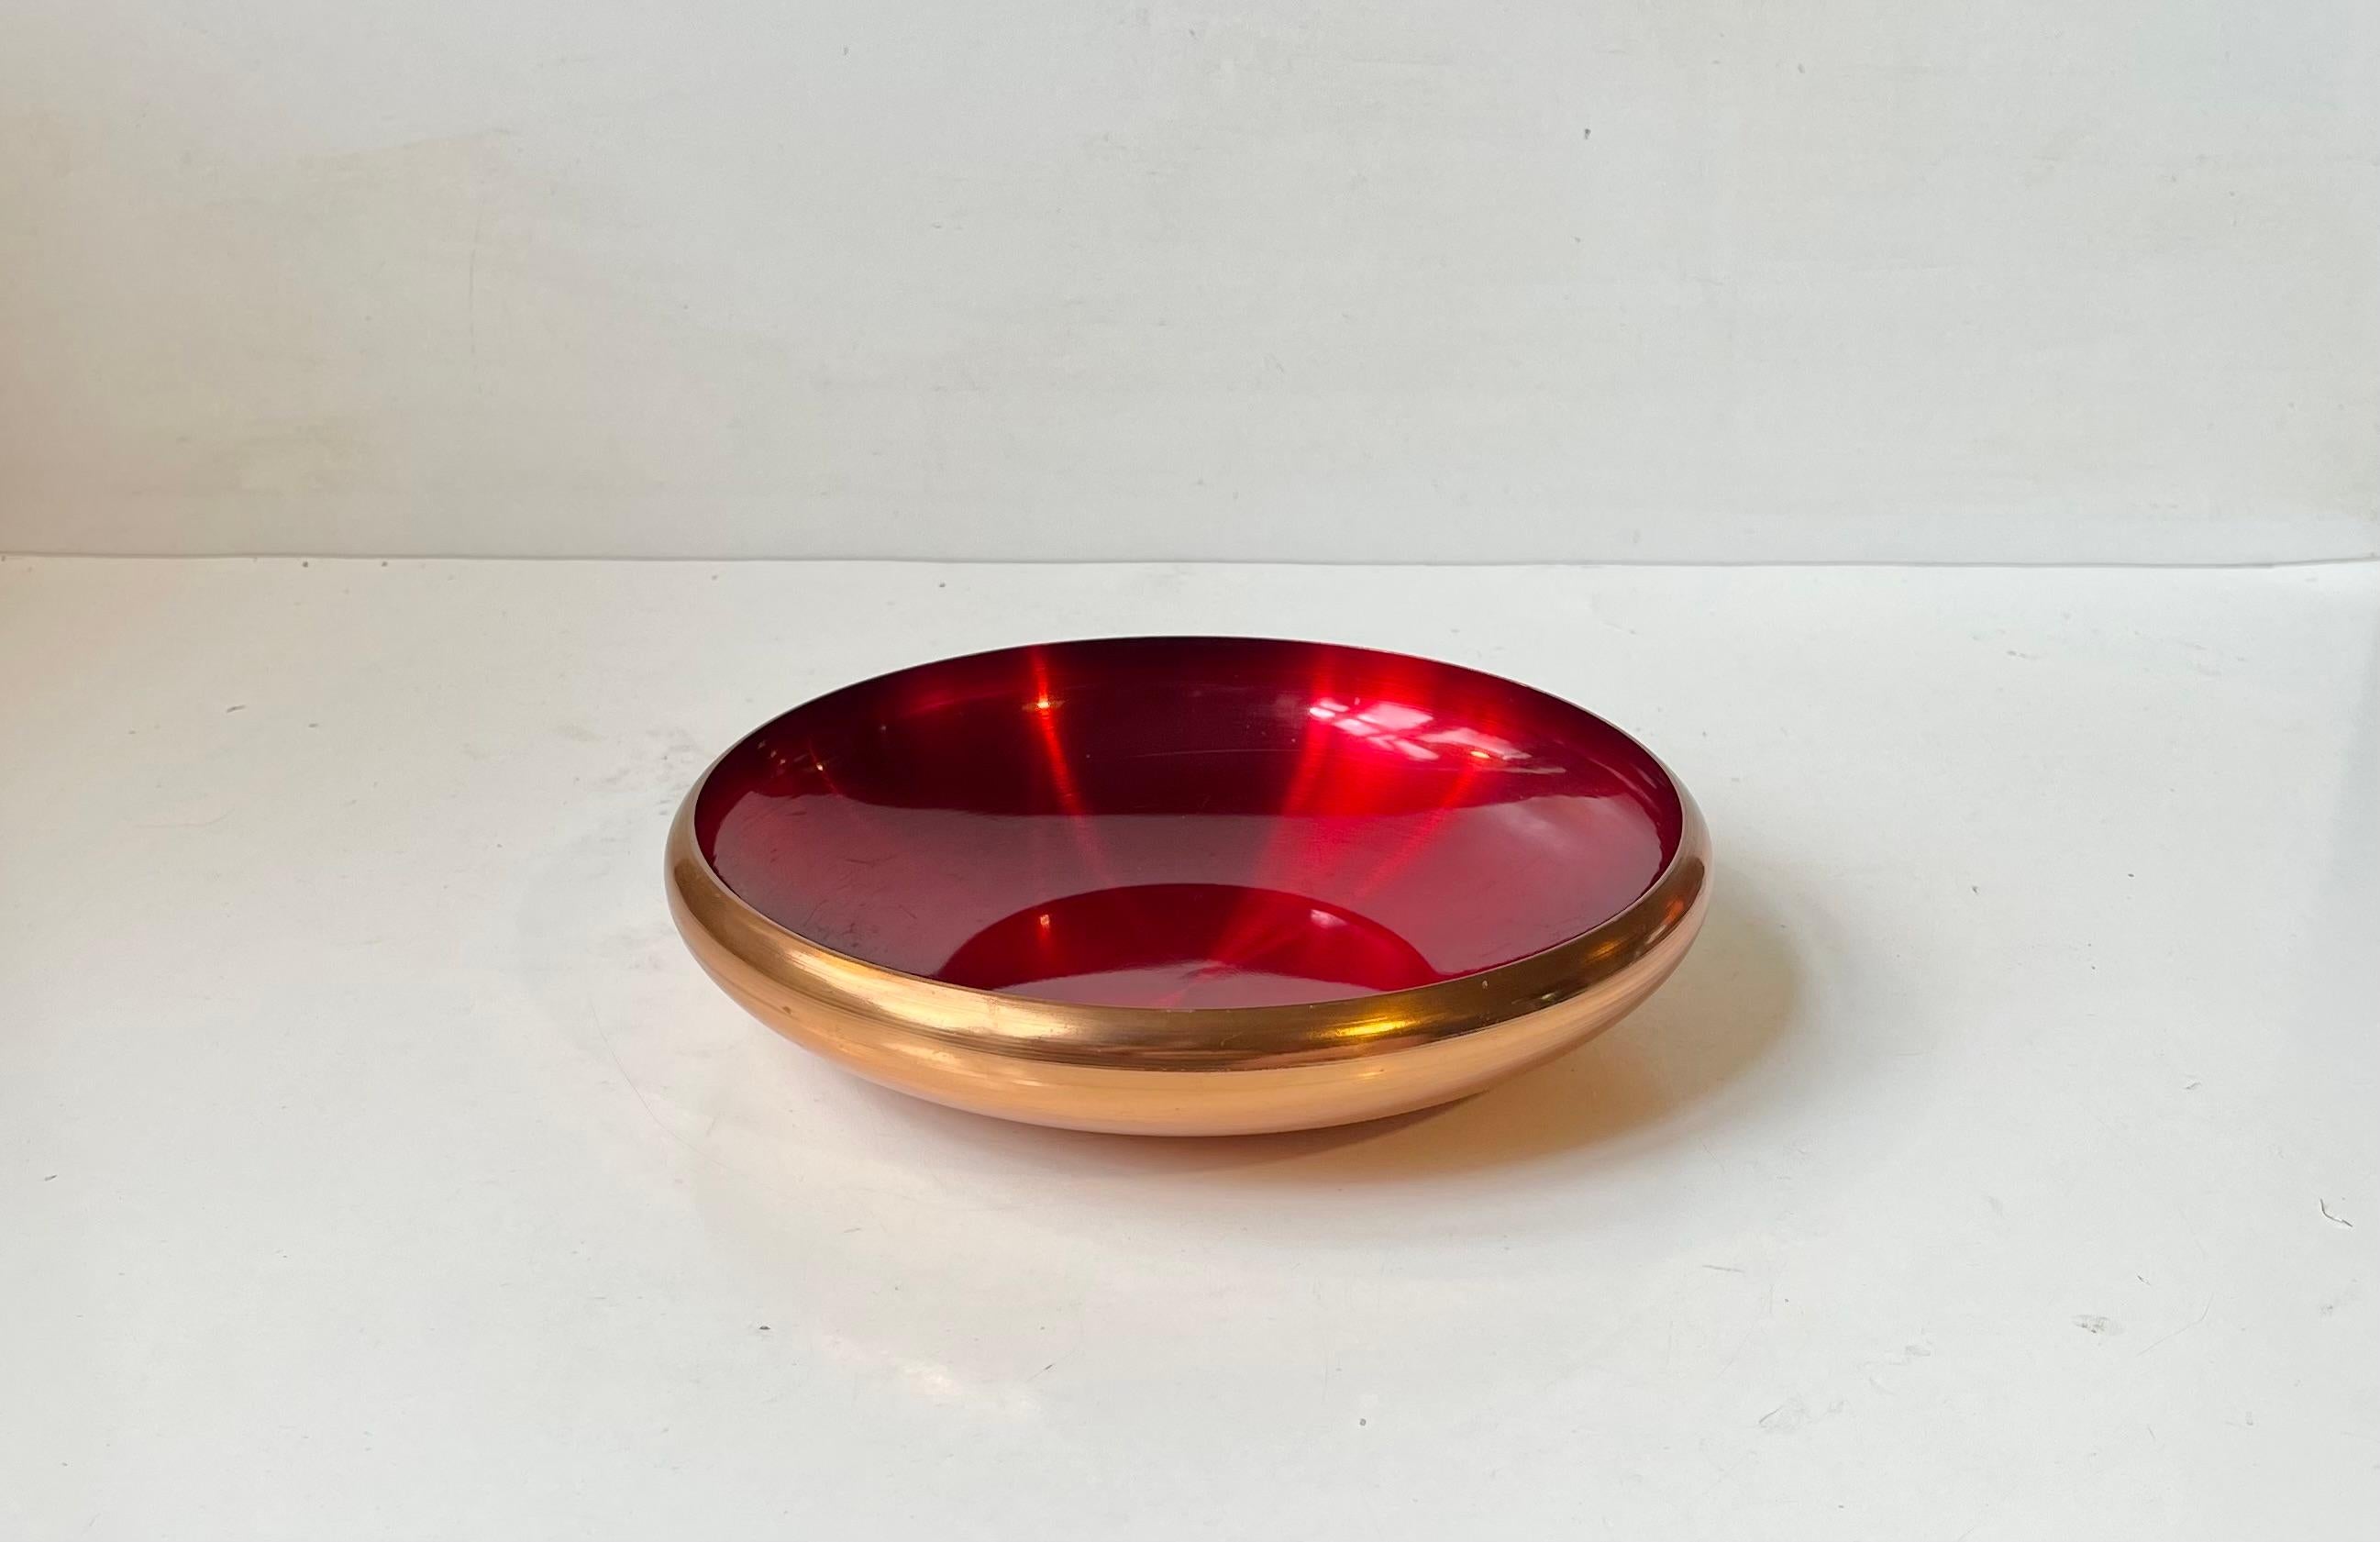 Norwegian solid Copper Bowl with interior ruby red enamel. Manufactured and designed by Odel Kobber in Norway during the 1960s. Stamped to the bottom. Measurements: D: 21 cm, H: 4.5 cm